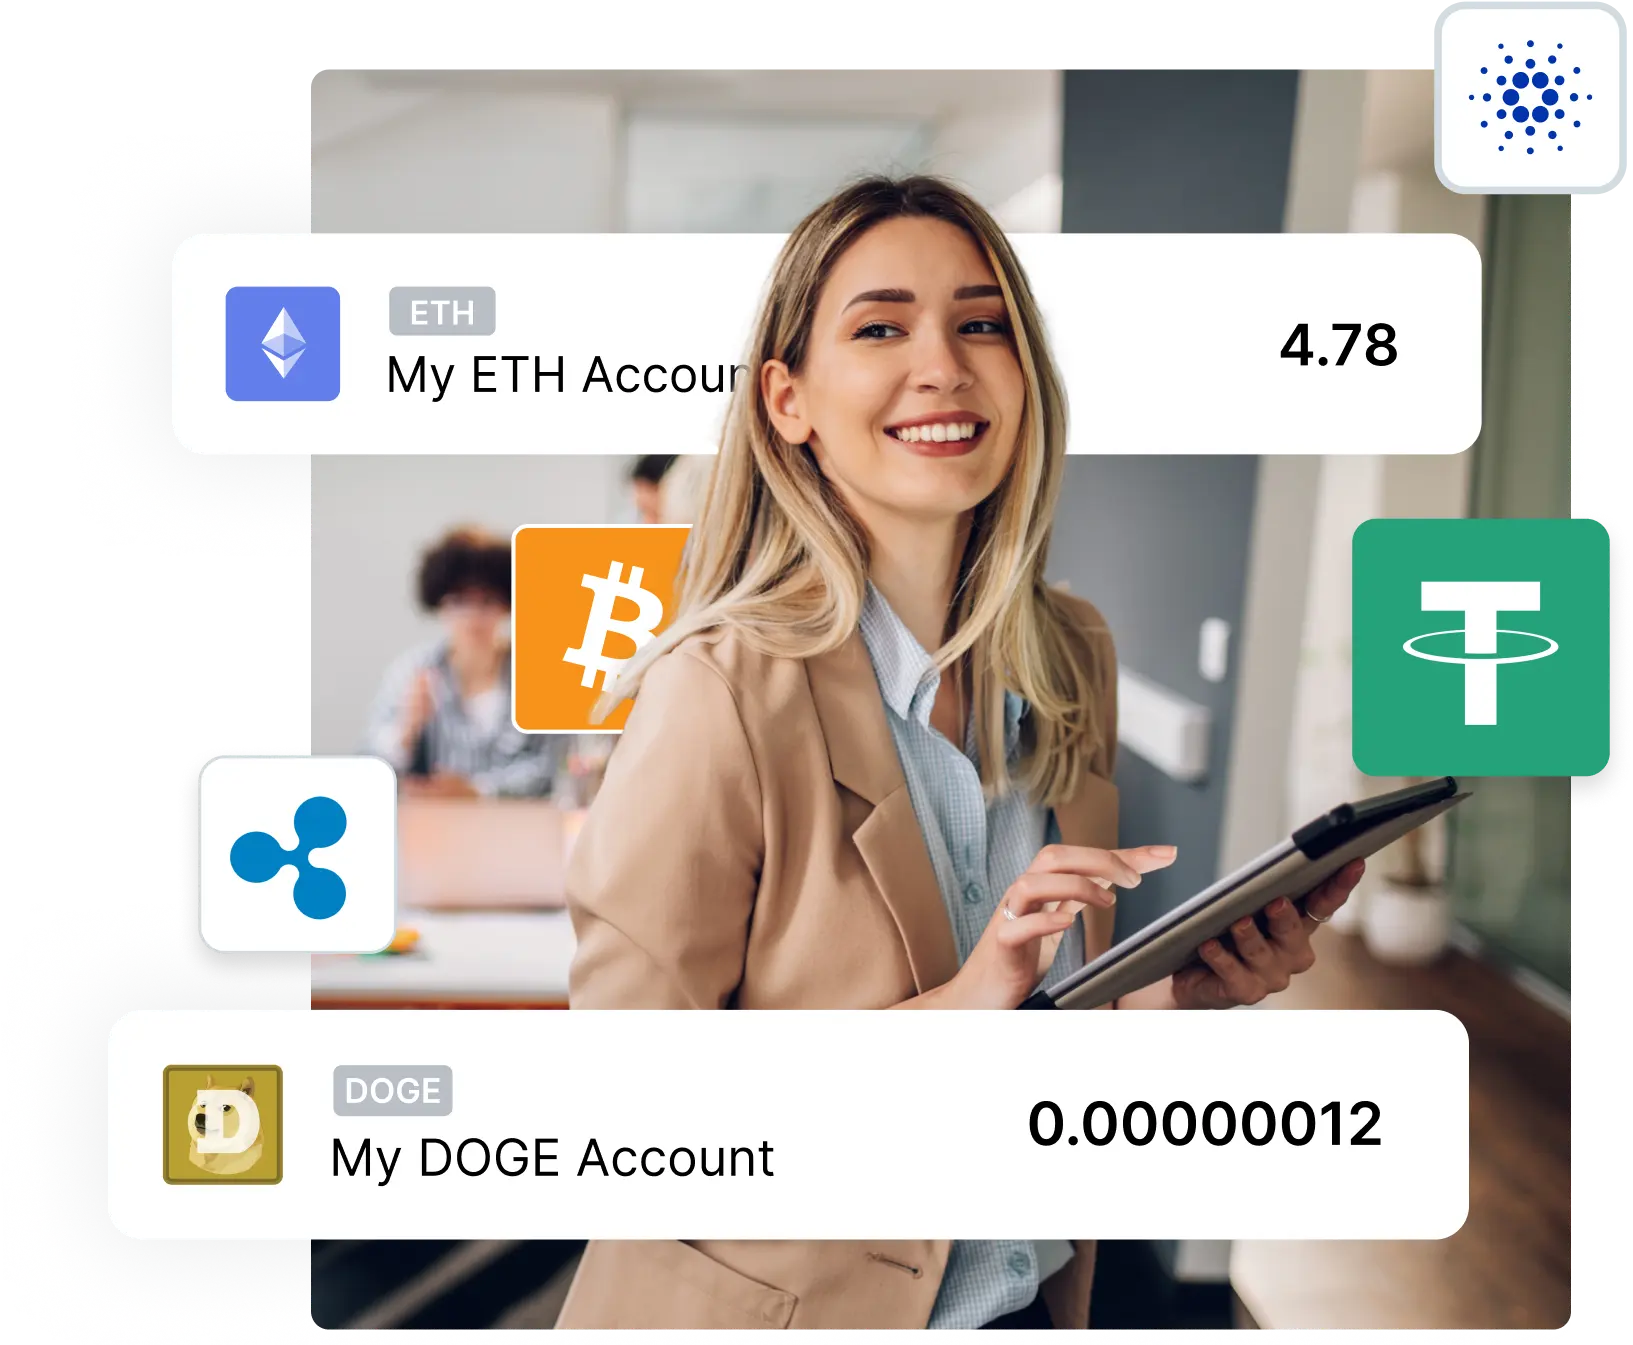 Make crypto transactions 24/7 from a single account.